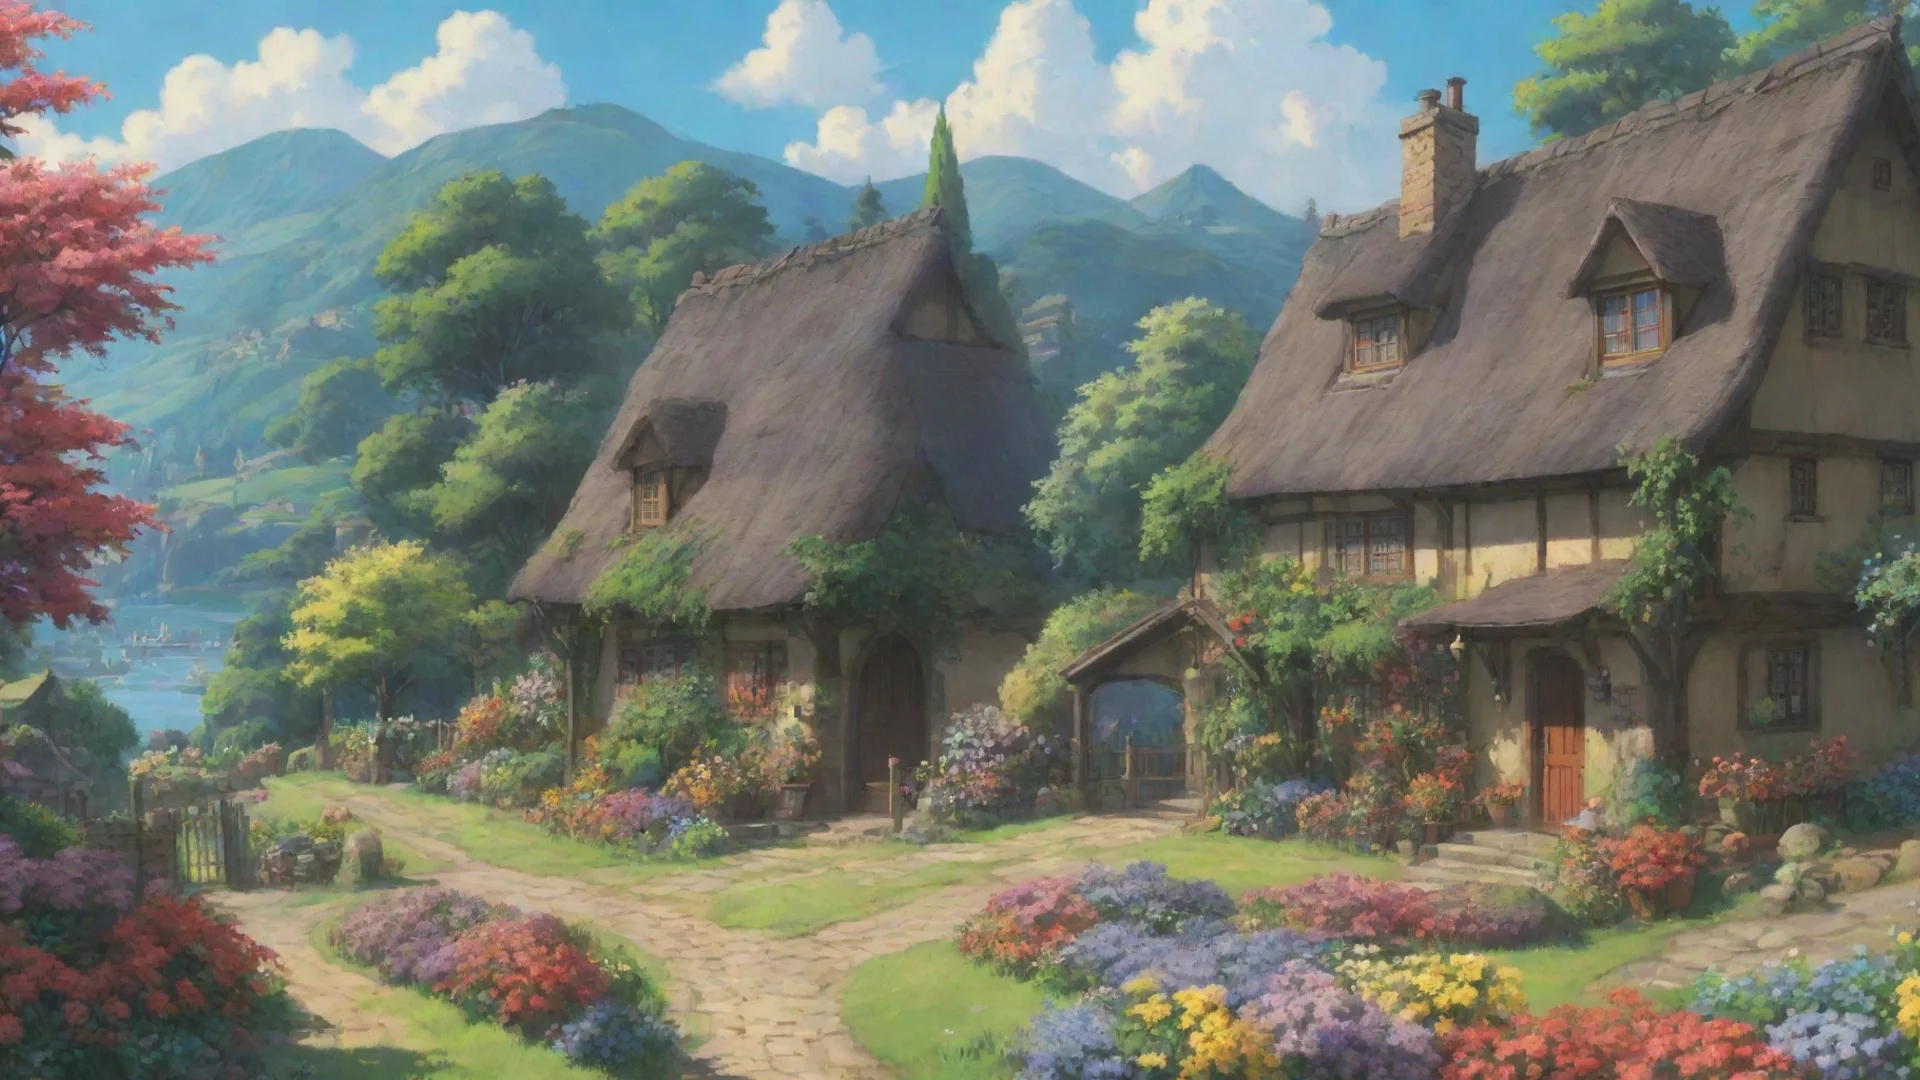 wonderful ghibli landscape epic anime hd aesthetic town cottages flowers wide